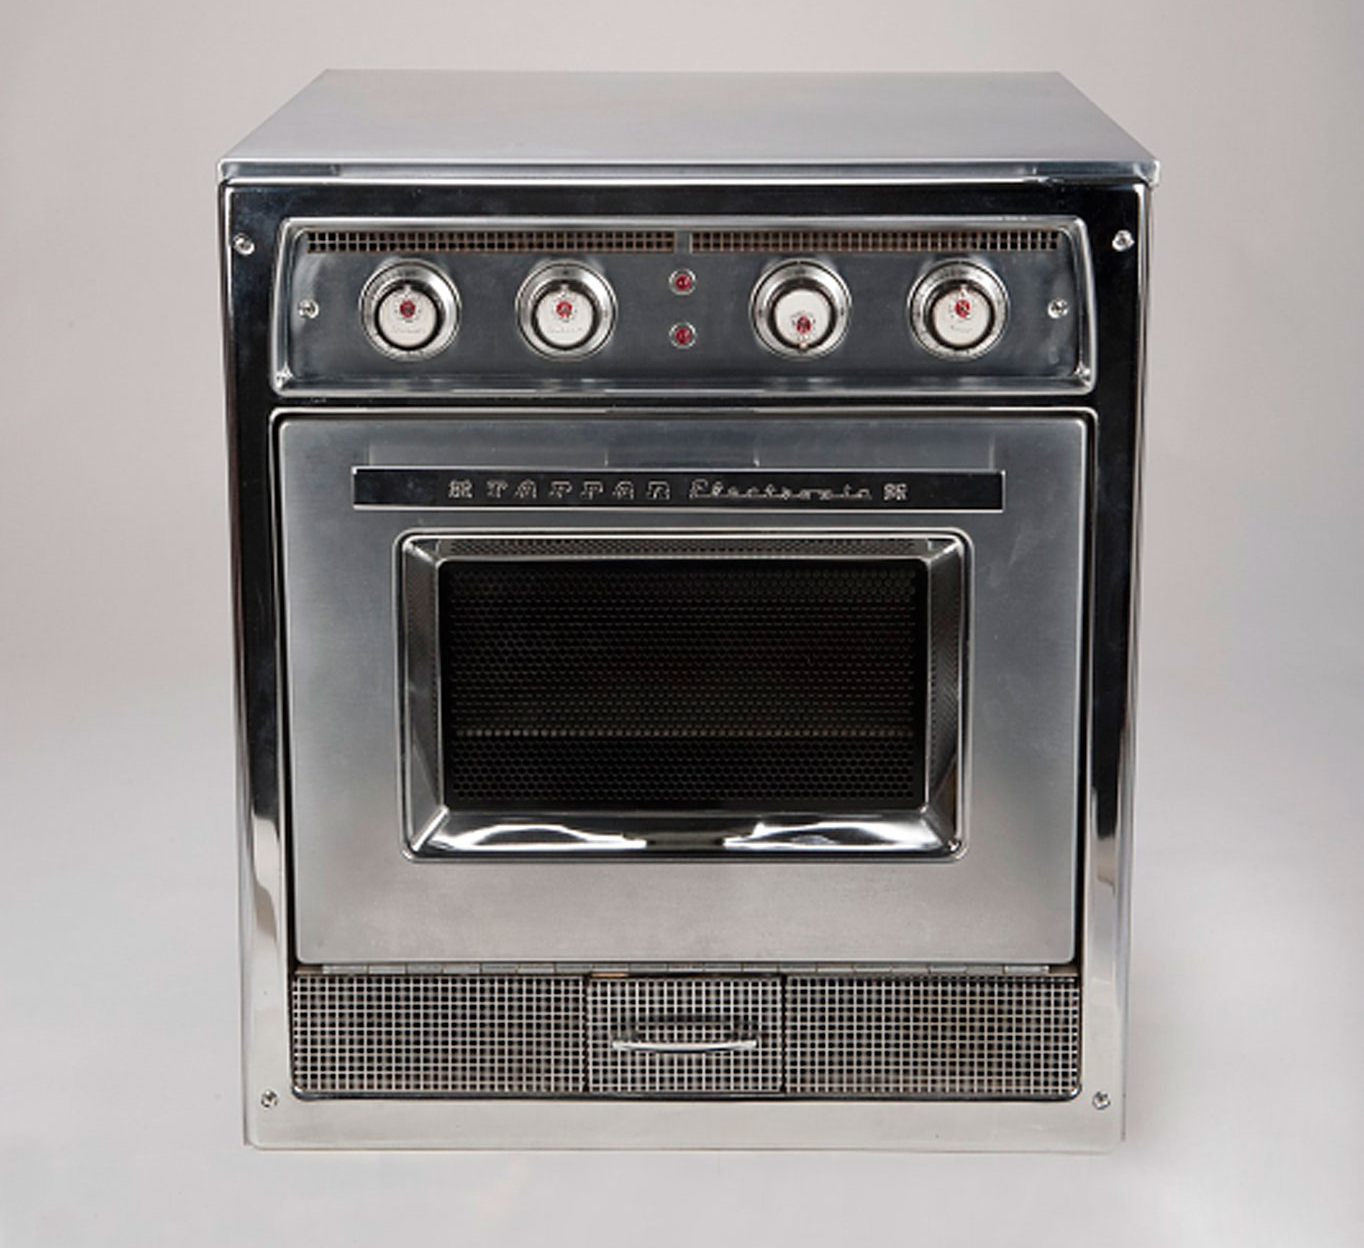 Rhodri Marsden's Interesting Objects: The microwave oven | The Independent